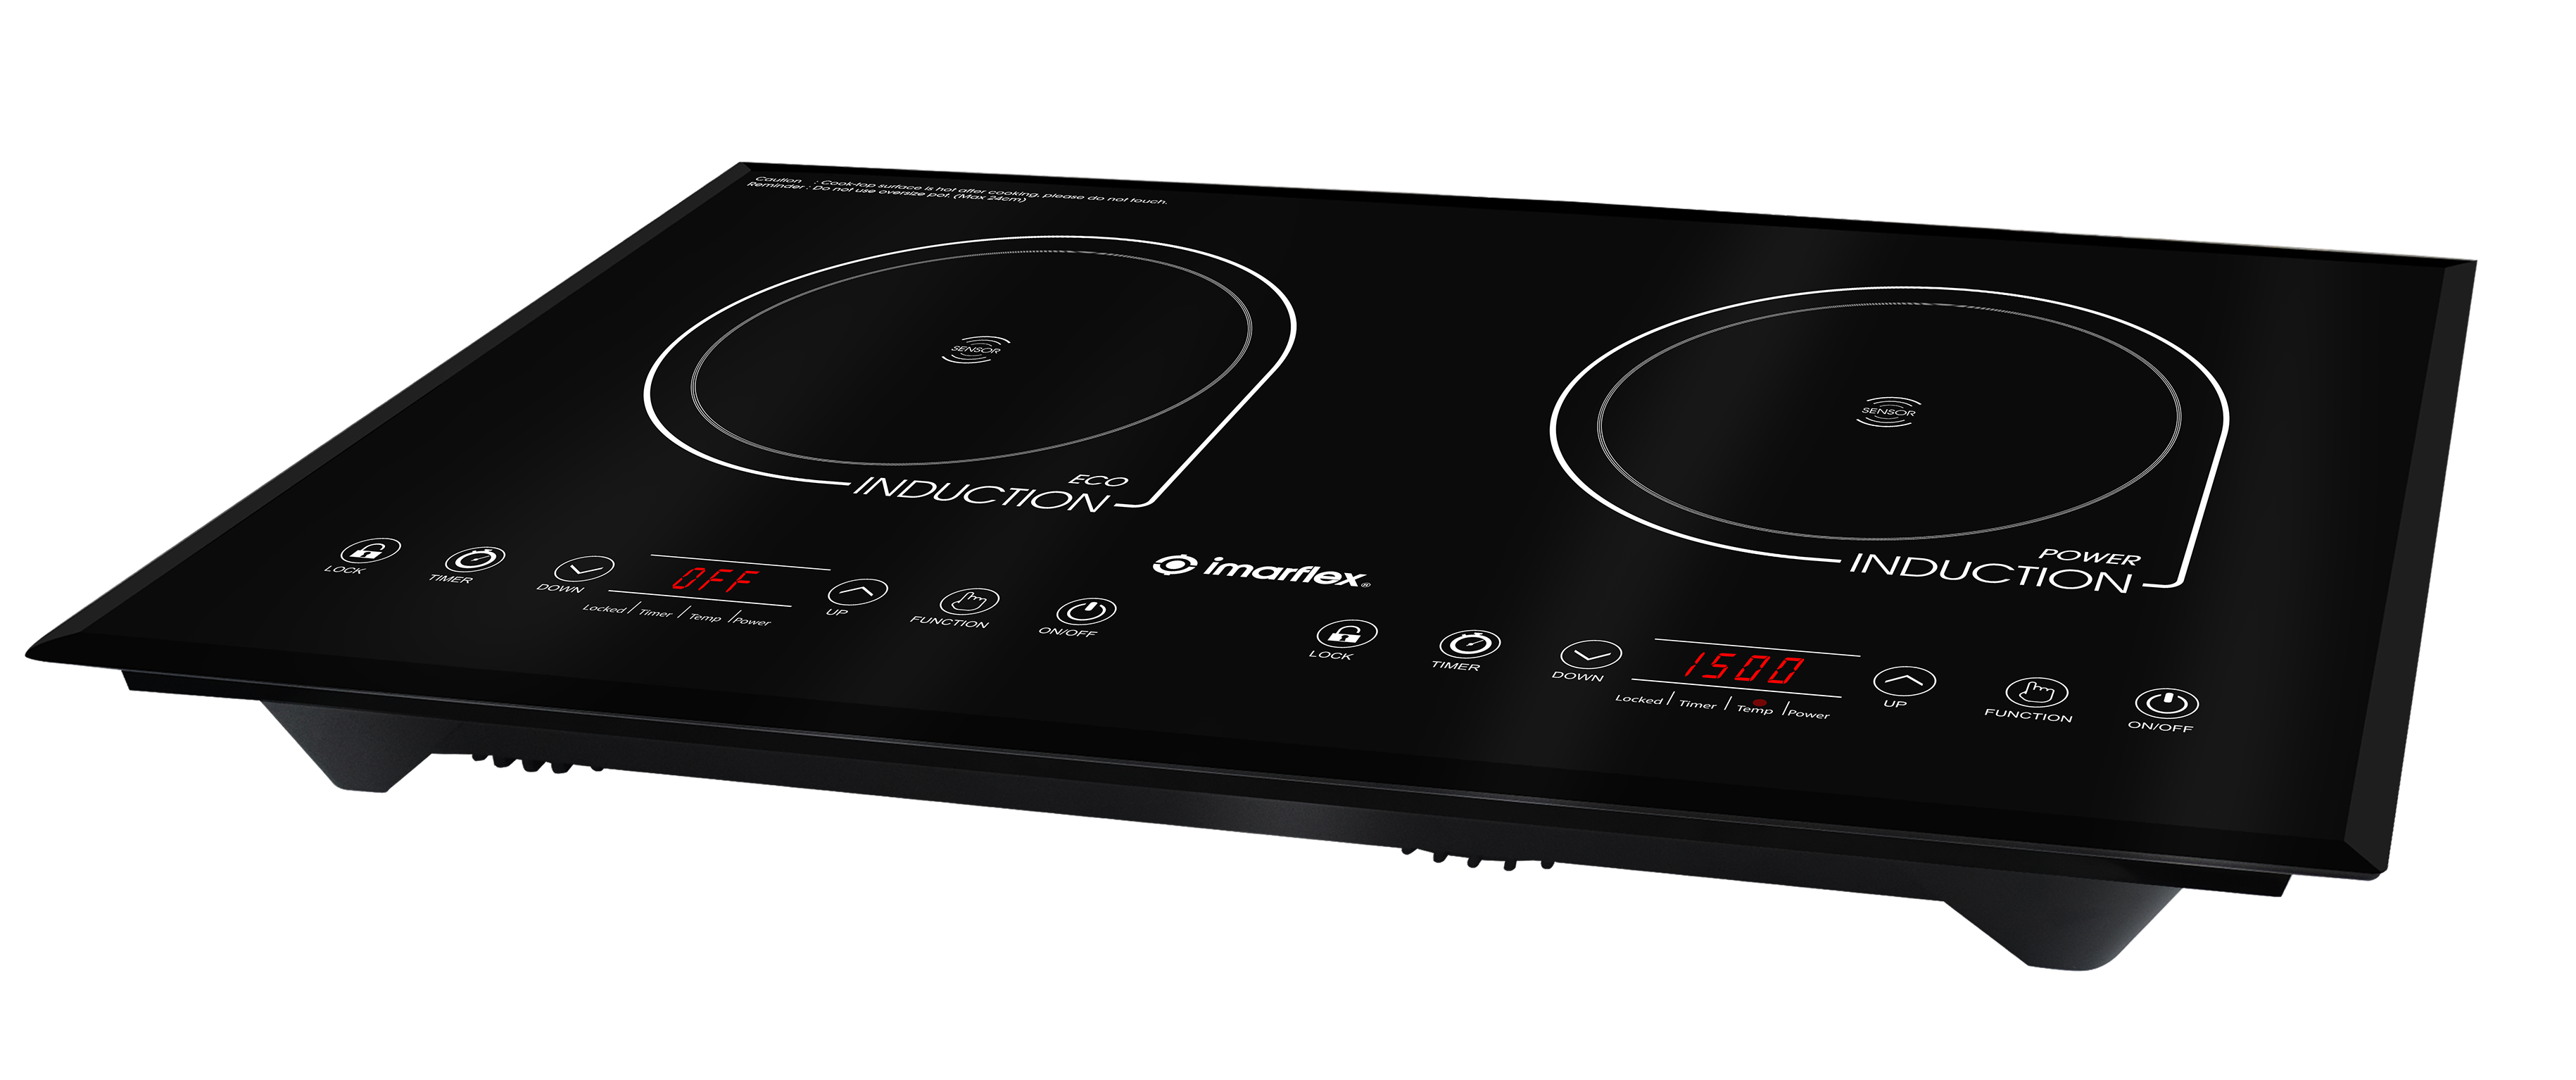 Imarflex Idx 3250b Built In Induction Cooker Twin Plate Lazada Ph